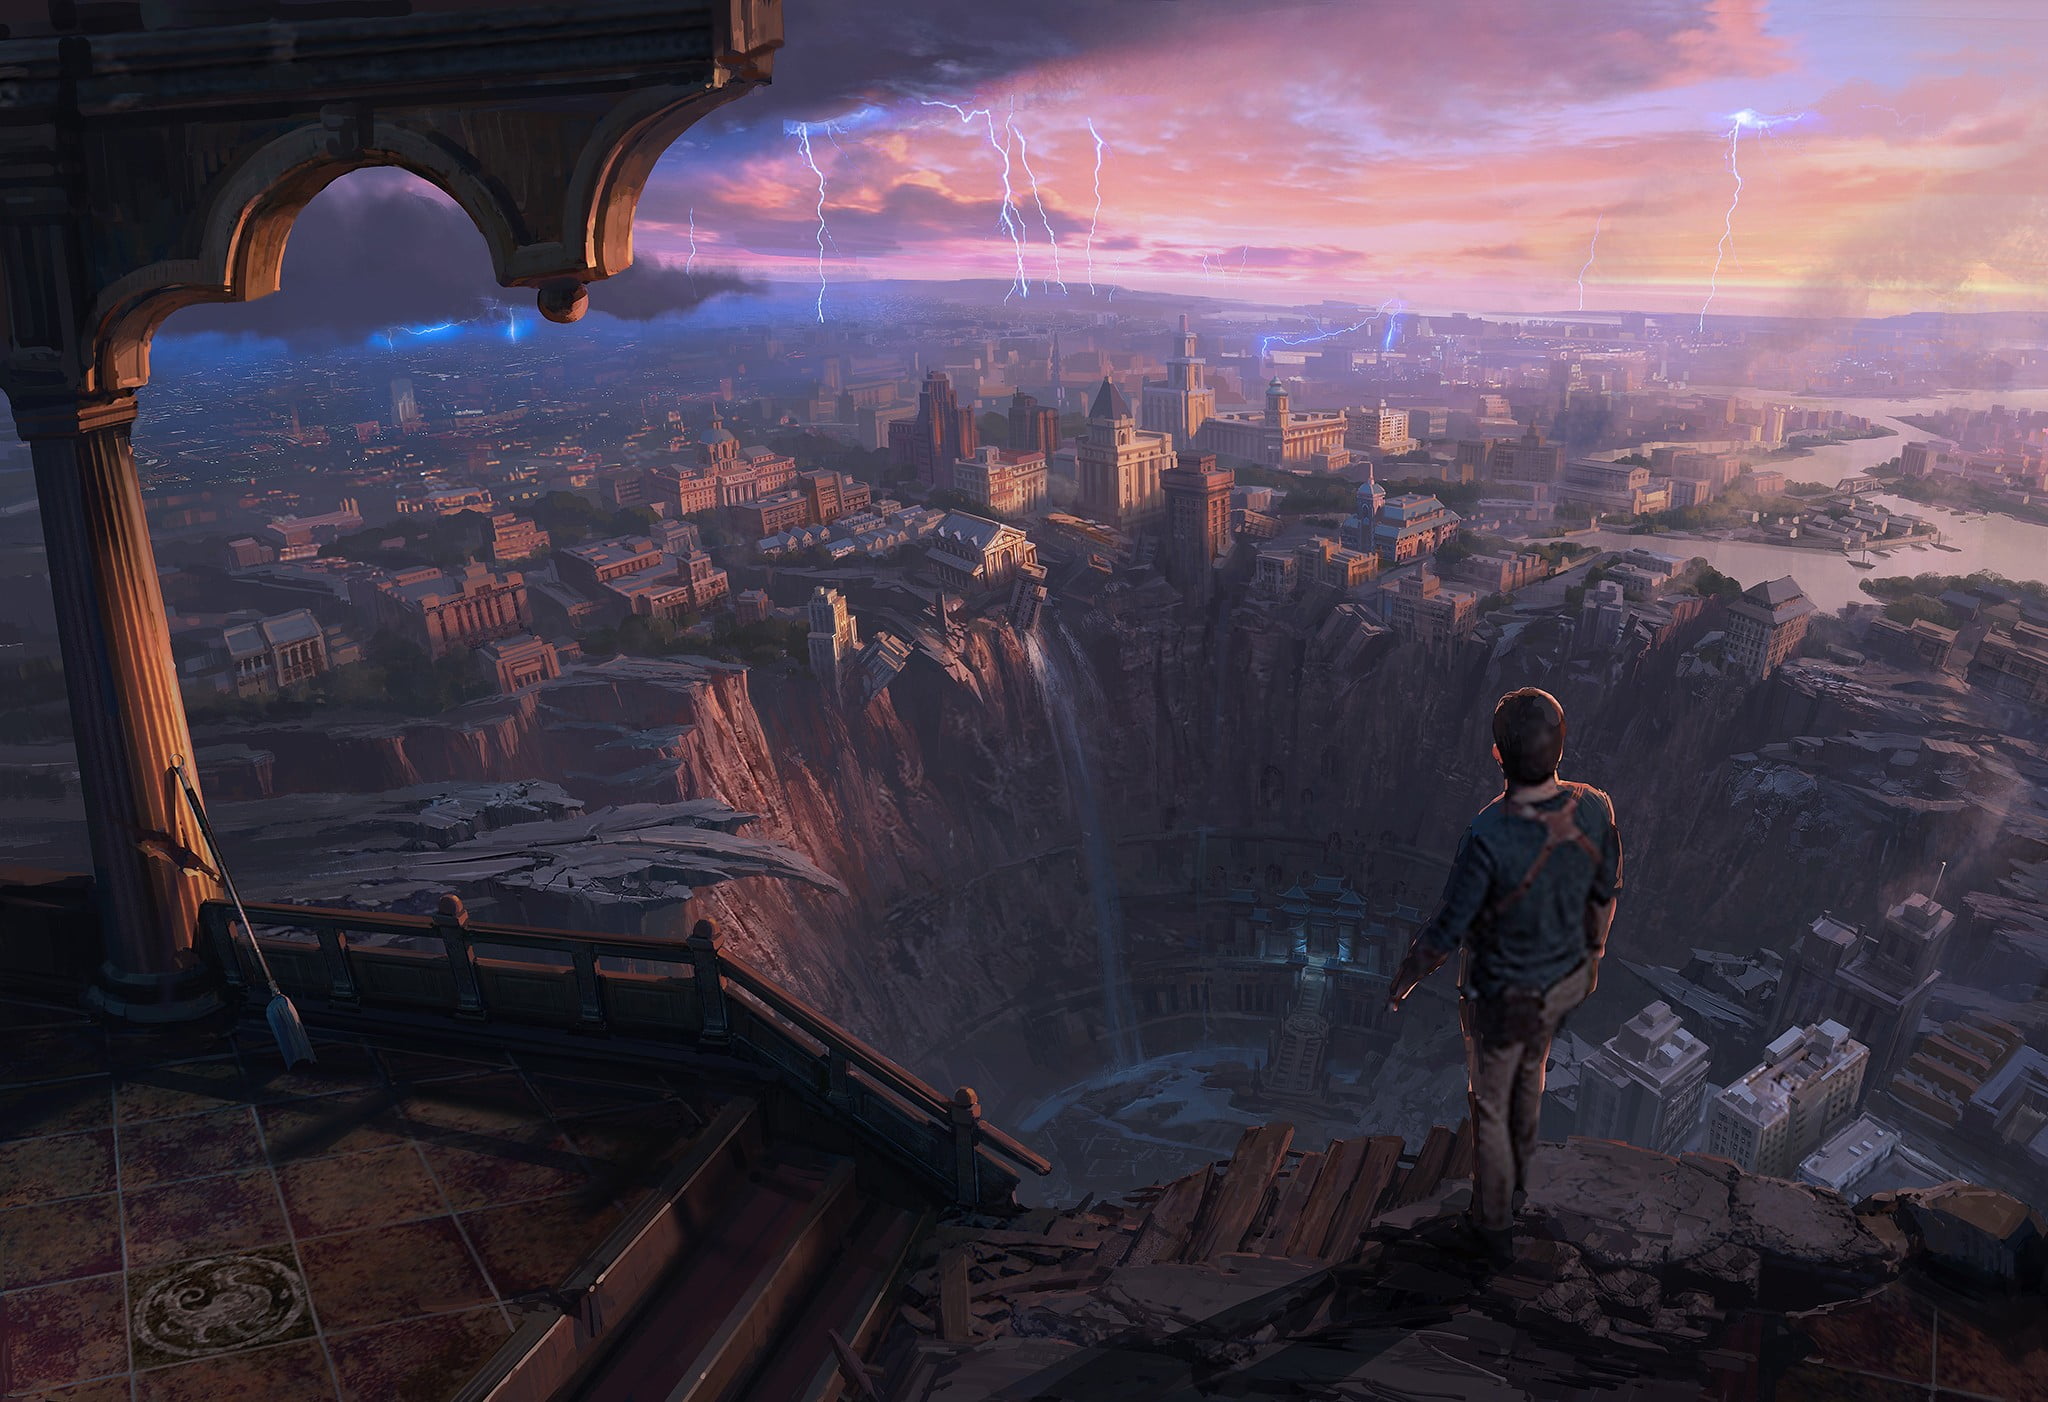 Uncharted Video Game Cover Illustration Fantasy Art Sunset Hd